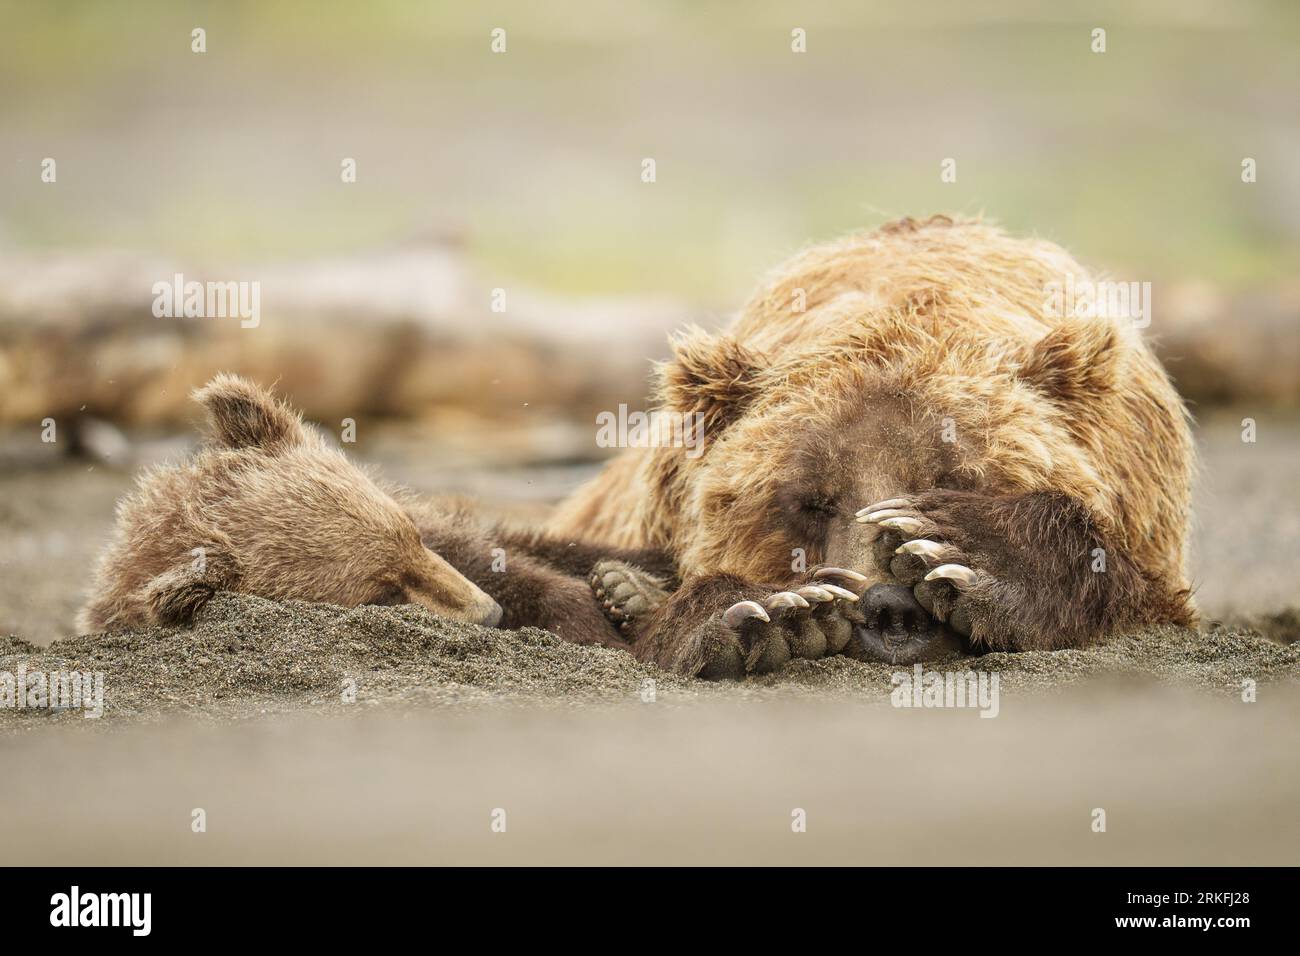 Bear Mother and Cub Napping Together Stock Photo